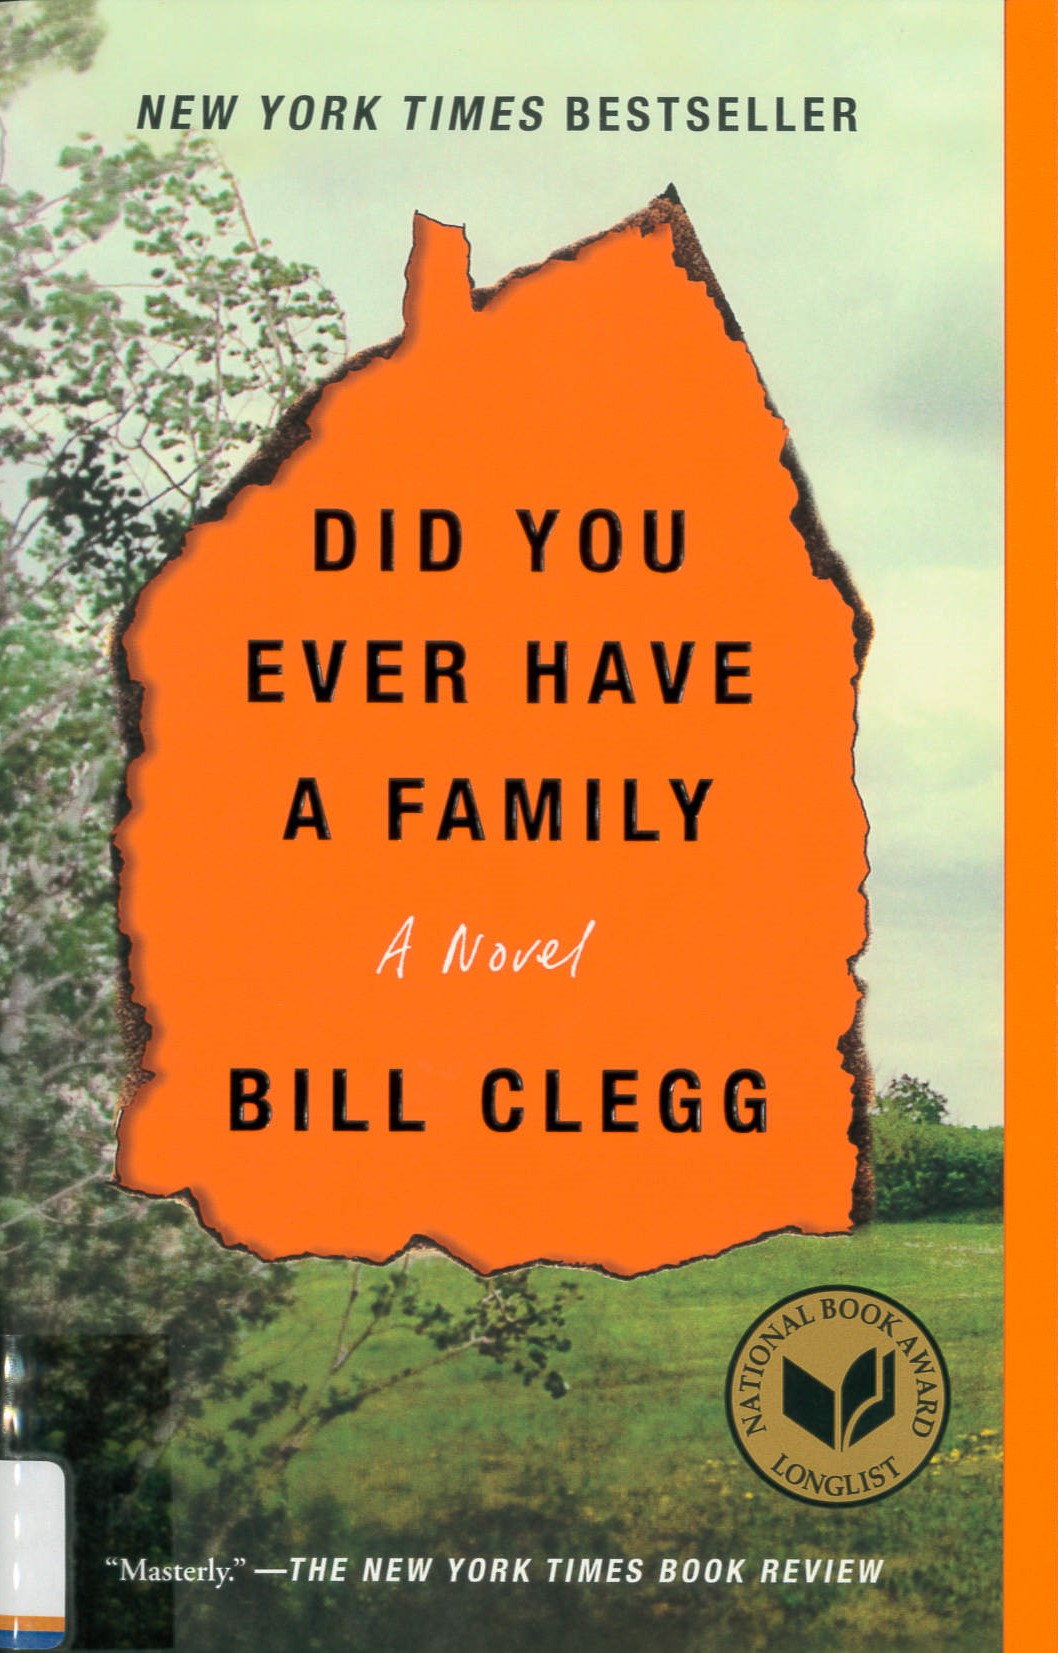 Did you ever have a family [a novel]